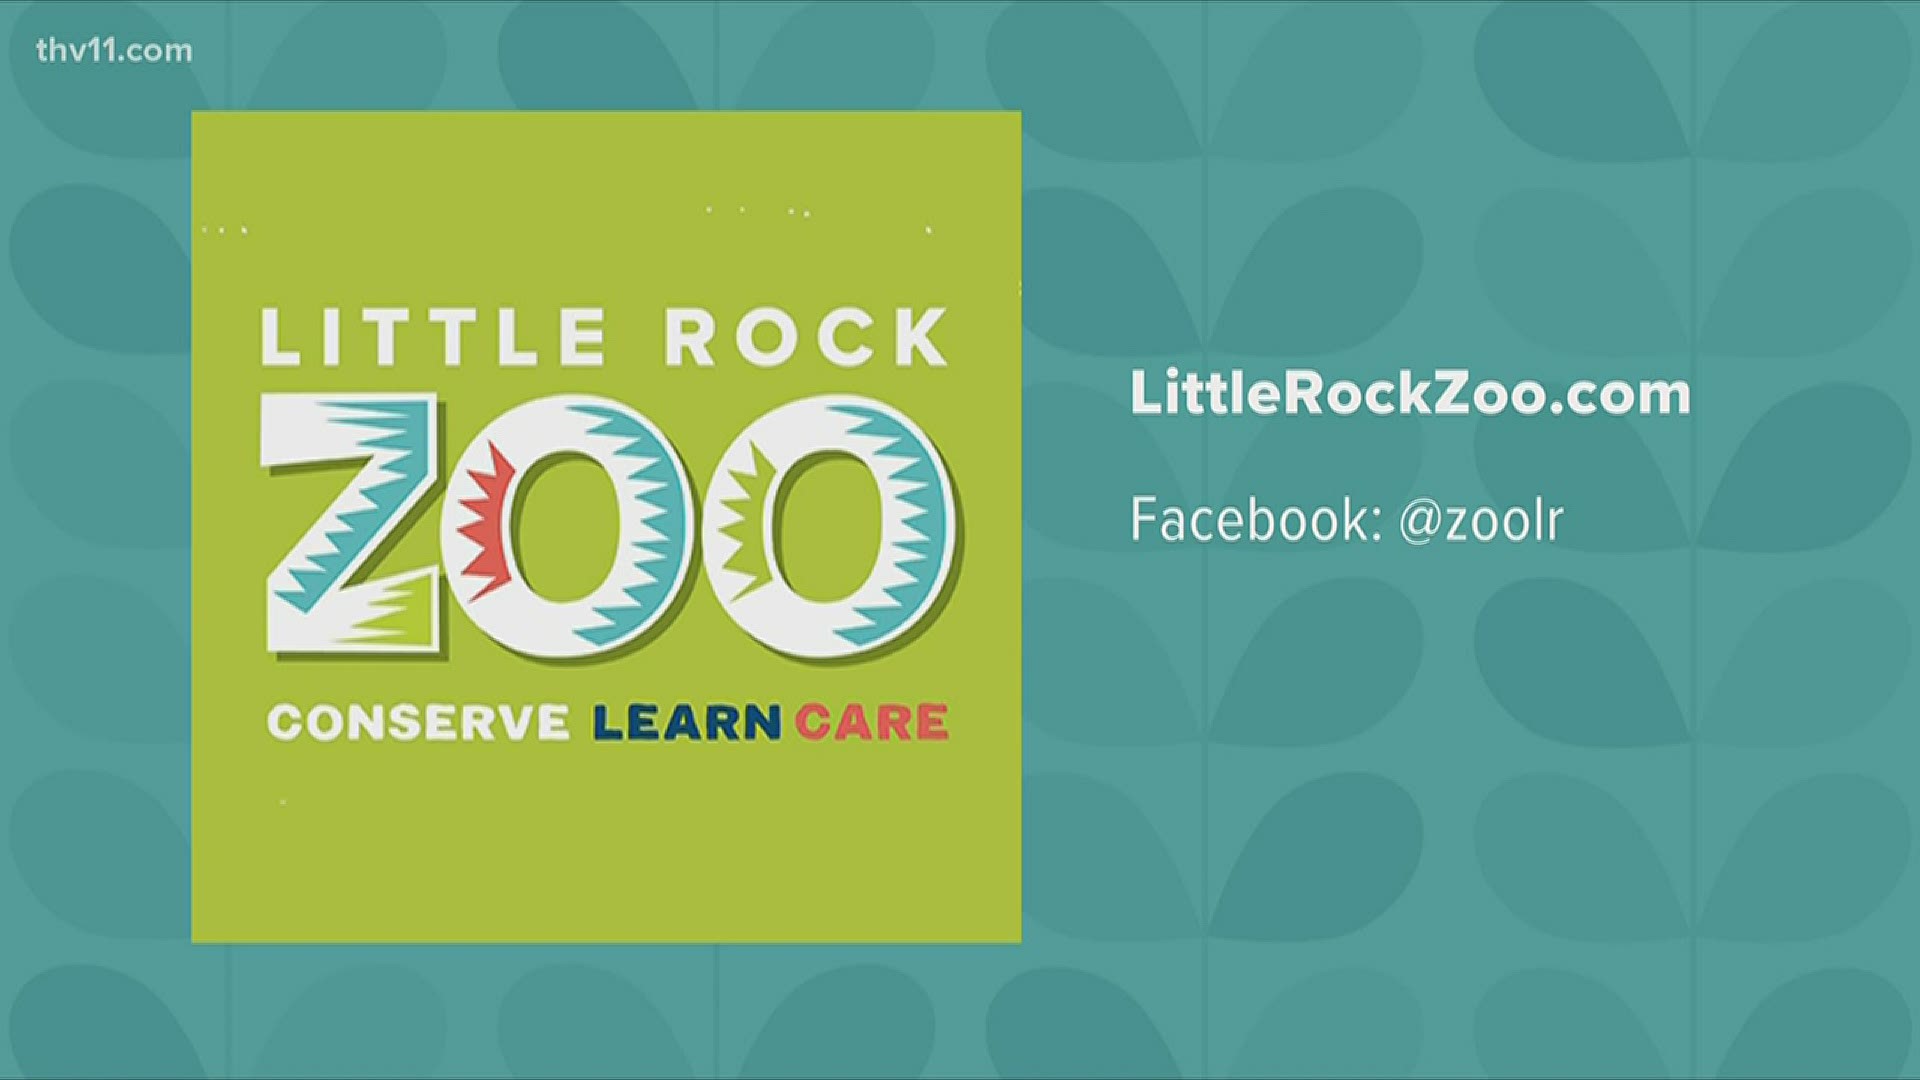 Big changes at the Little Rock Zoo. How we could soon be able to visit our favorite animals again!